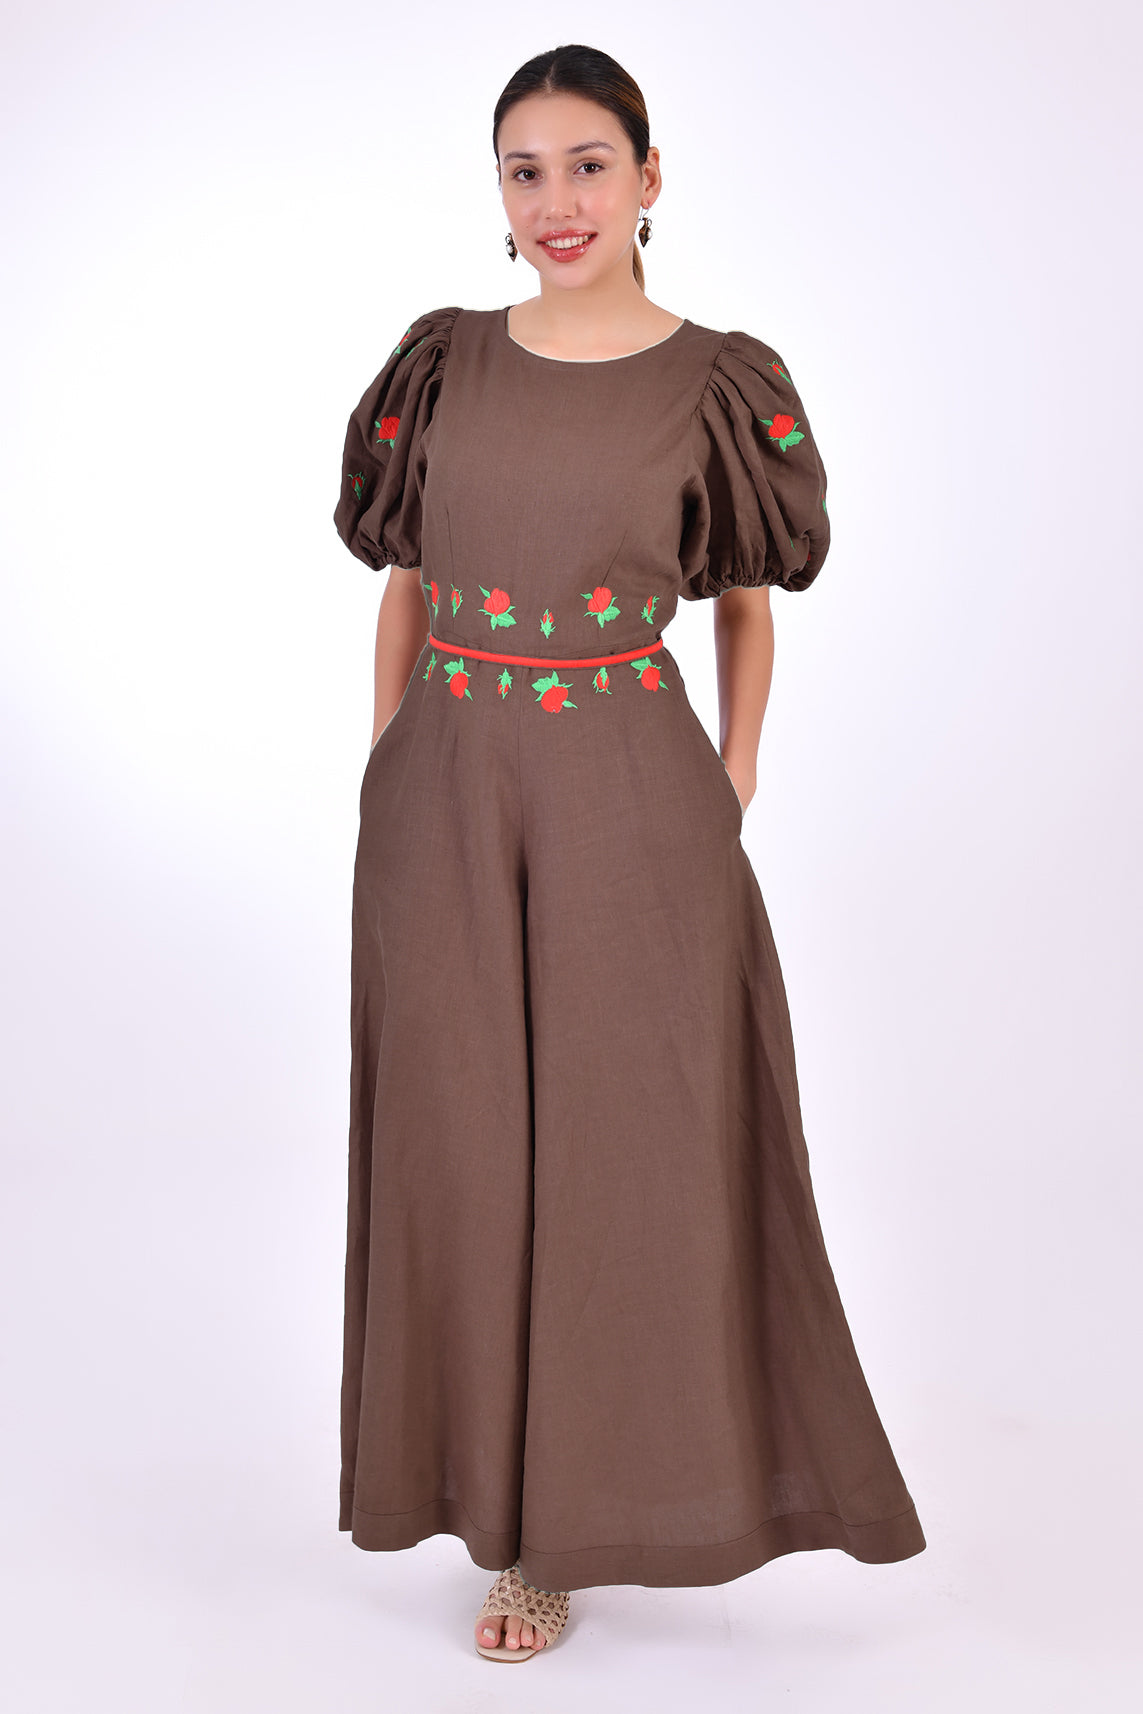 DATCHA JUMPSUIT 2 SLEEVES by Fanm Mon